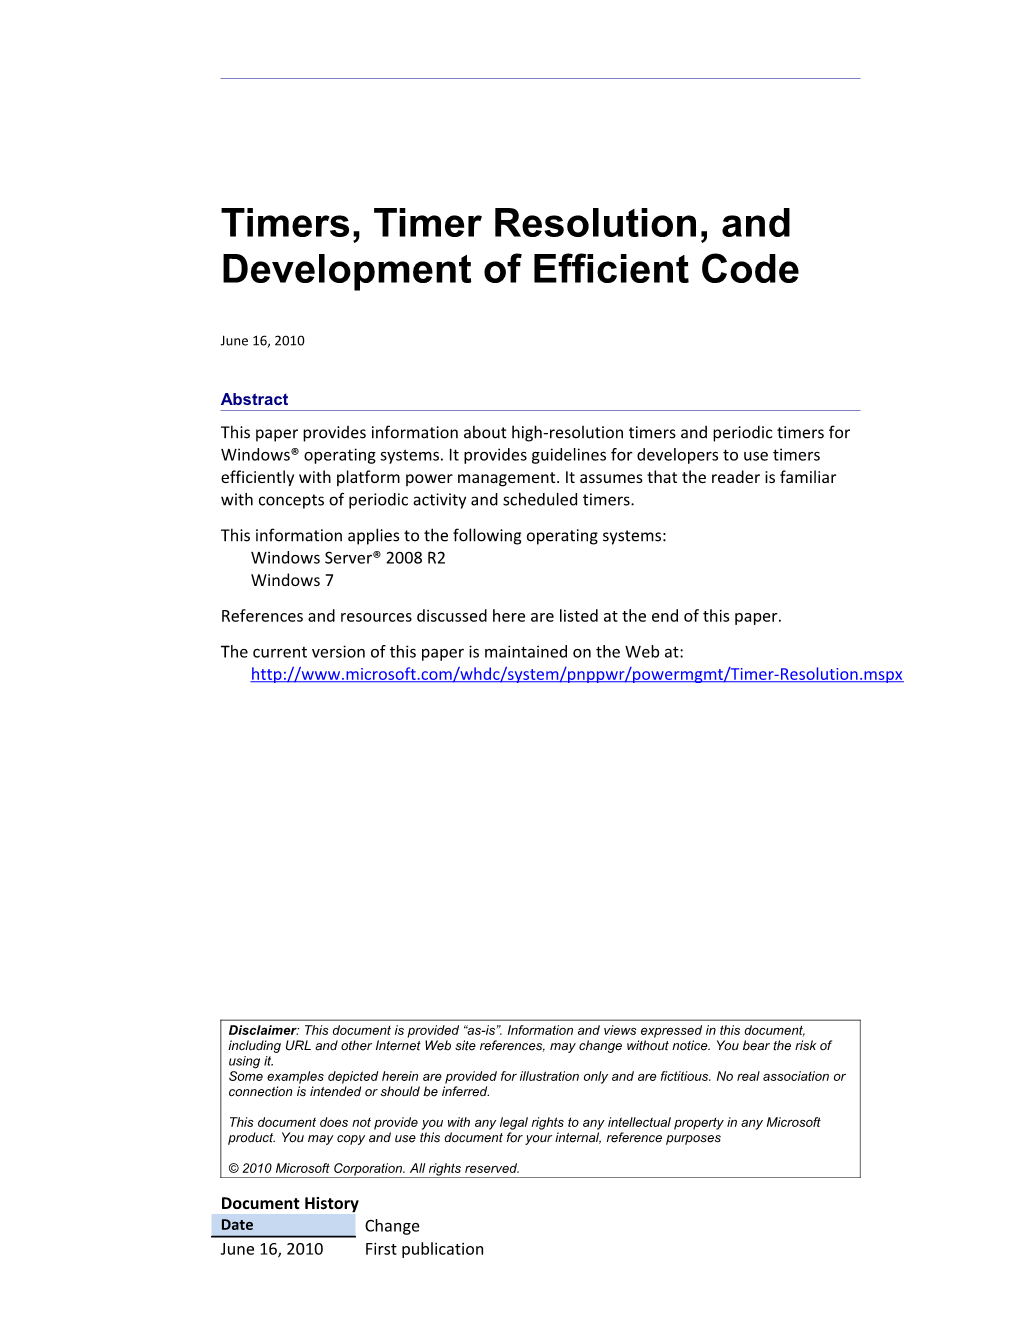 Timers, Timer Resolution, and Development of Efficient Code - 1